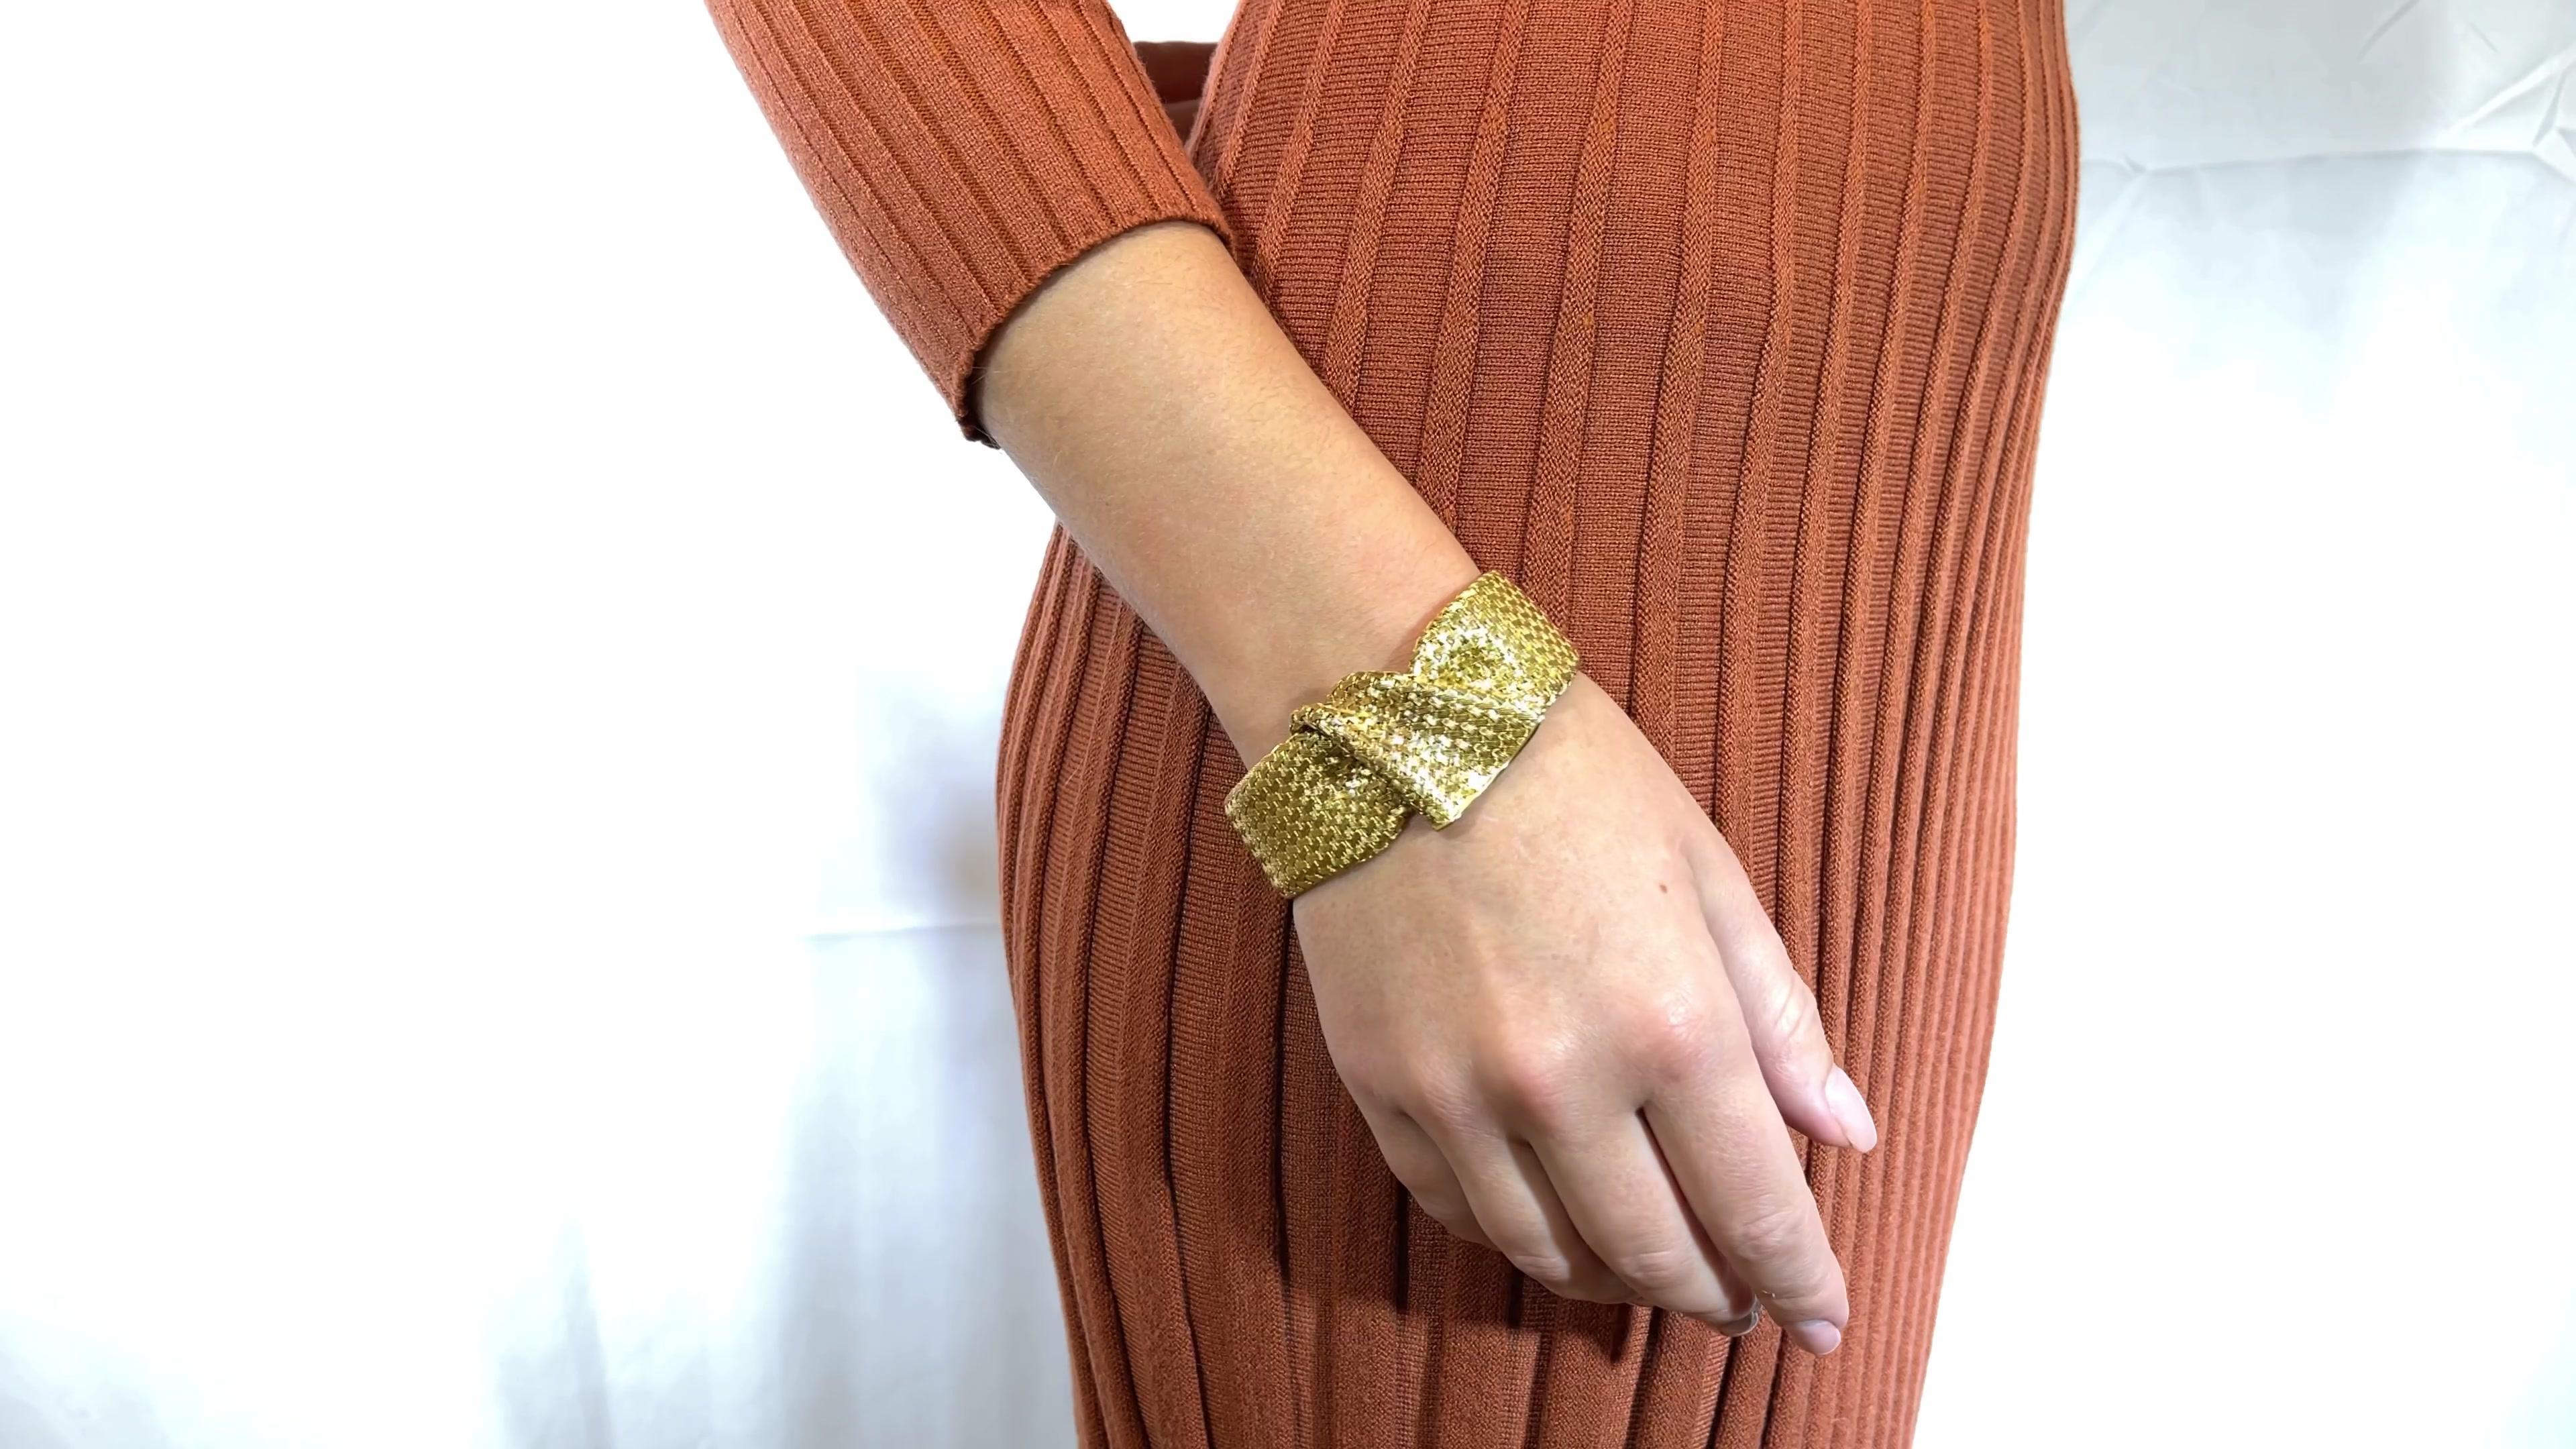 One Retro French 18k Gold Bracelet. Crafted in 18 karat yellow gold with French hallmarks and maker's mark, weighing 58 grams and measuring 7 1/2 inches in length. Circa 1940s. 

About The Piece: This bracelet is sophisticated and classic. It